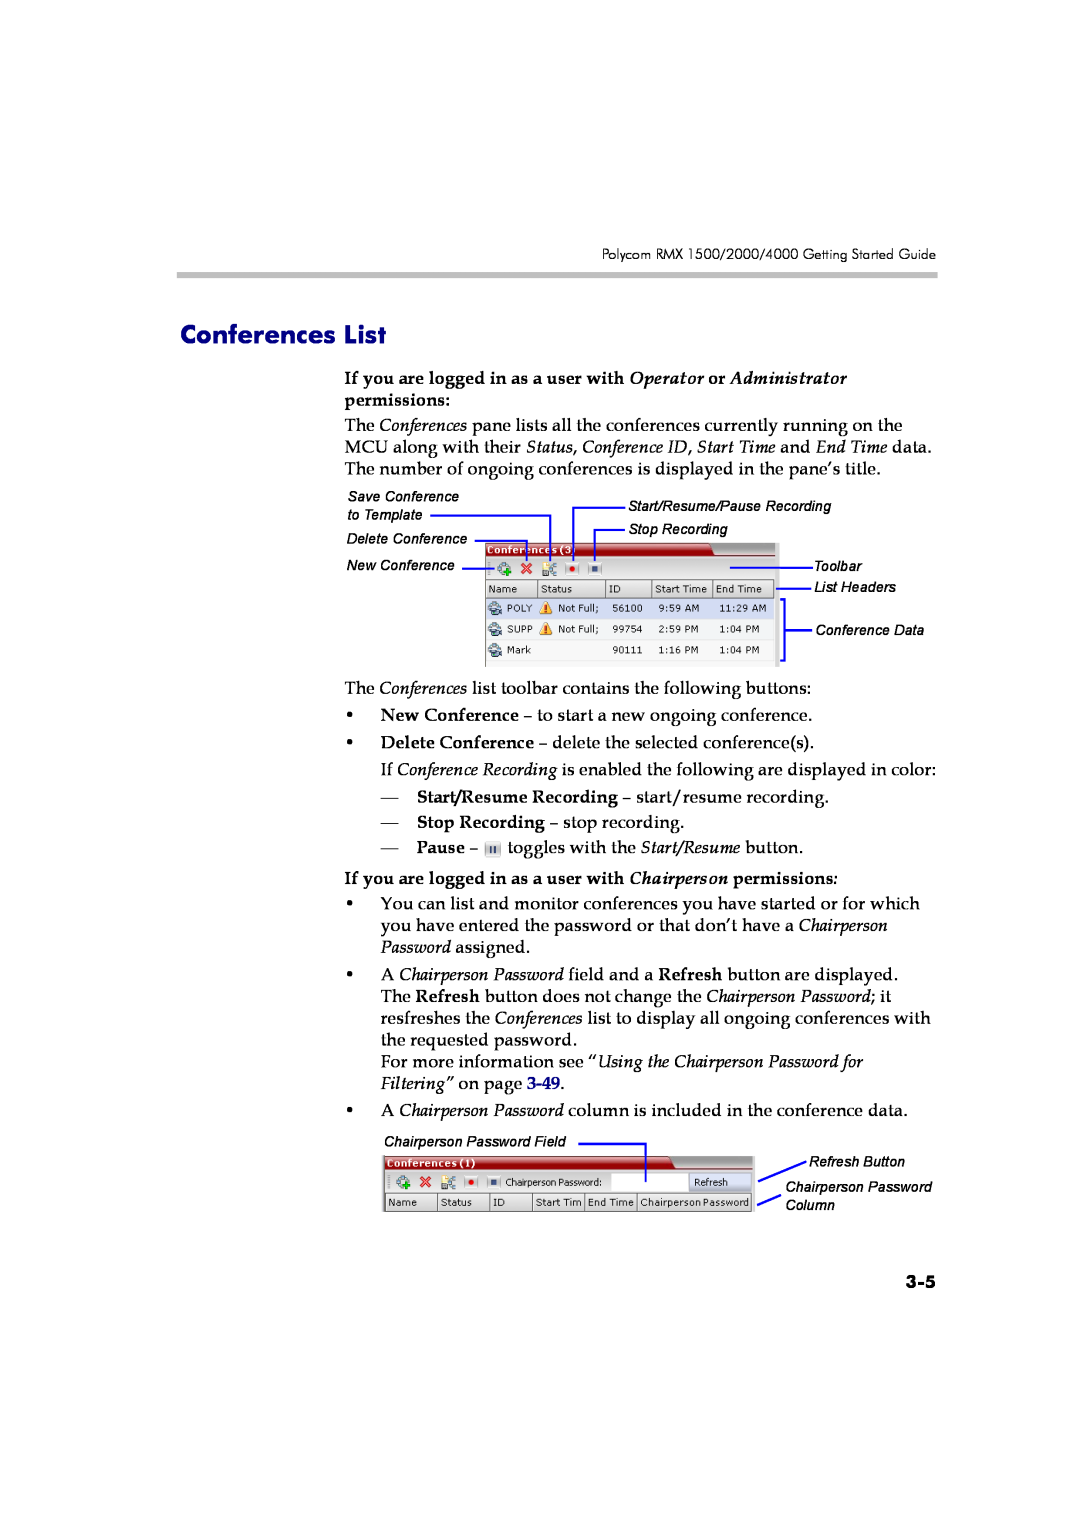 Polycom DOC2560B manual Conferences List, If you are logged in as a user with Chairperson permissions 